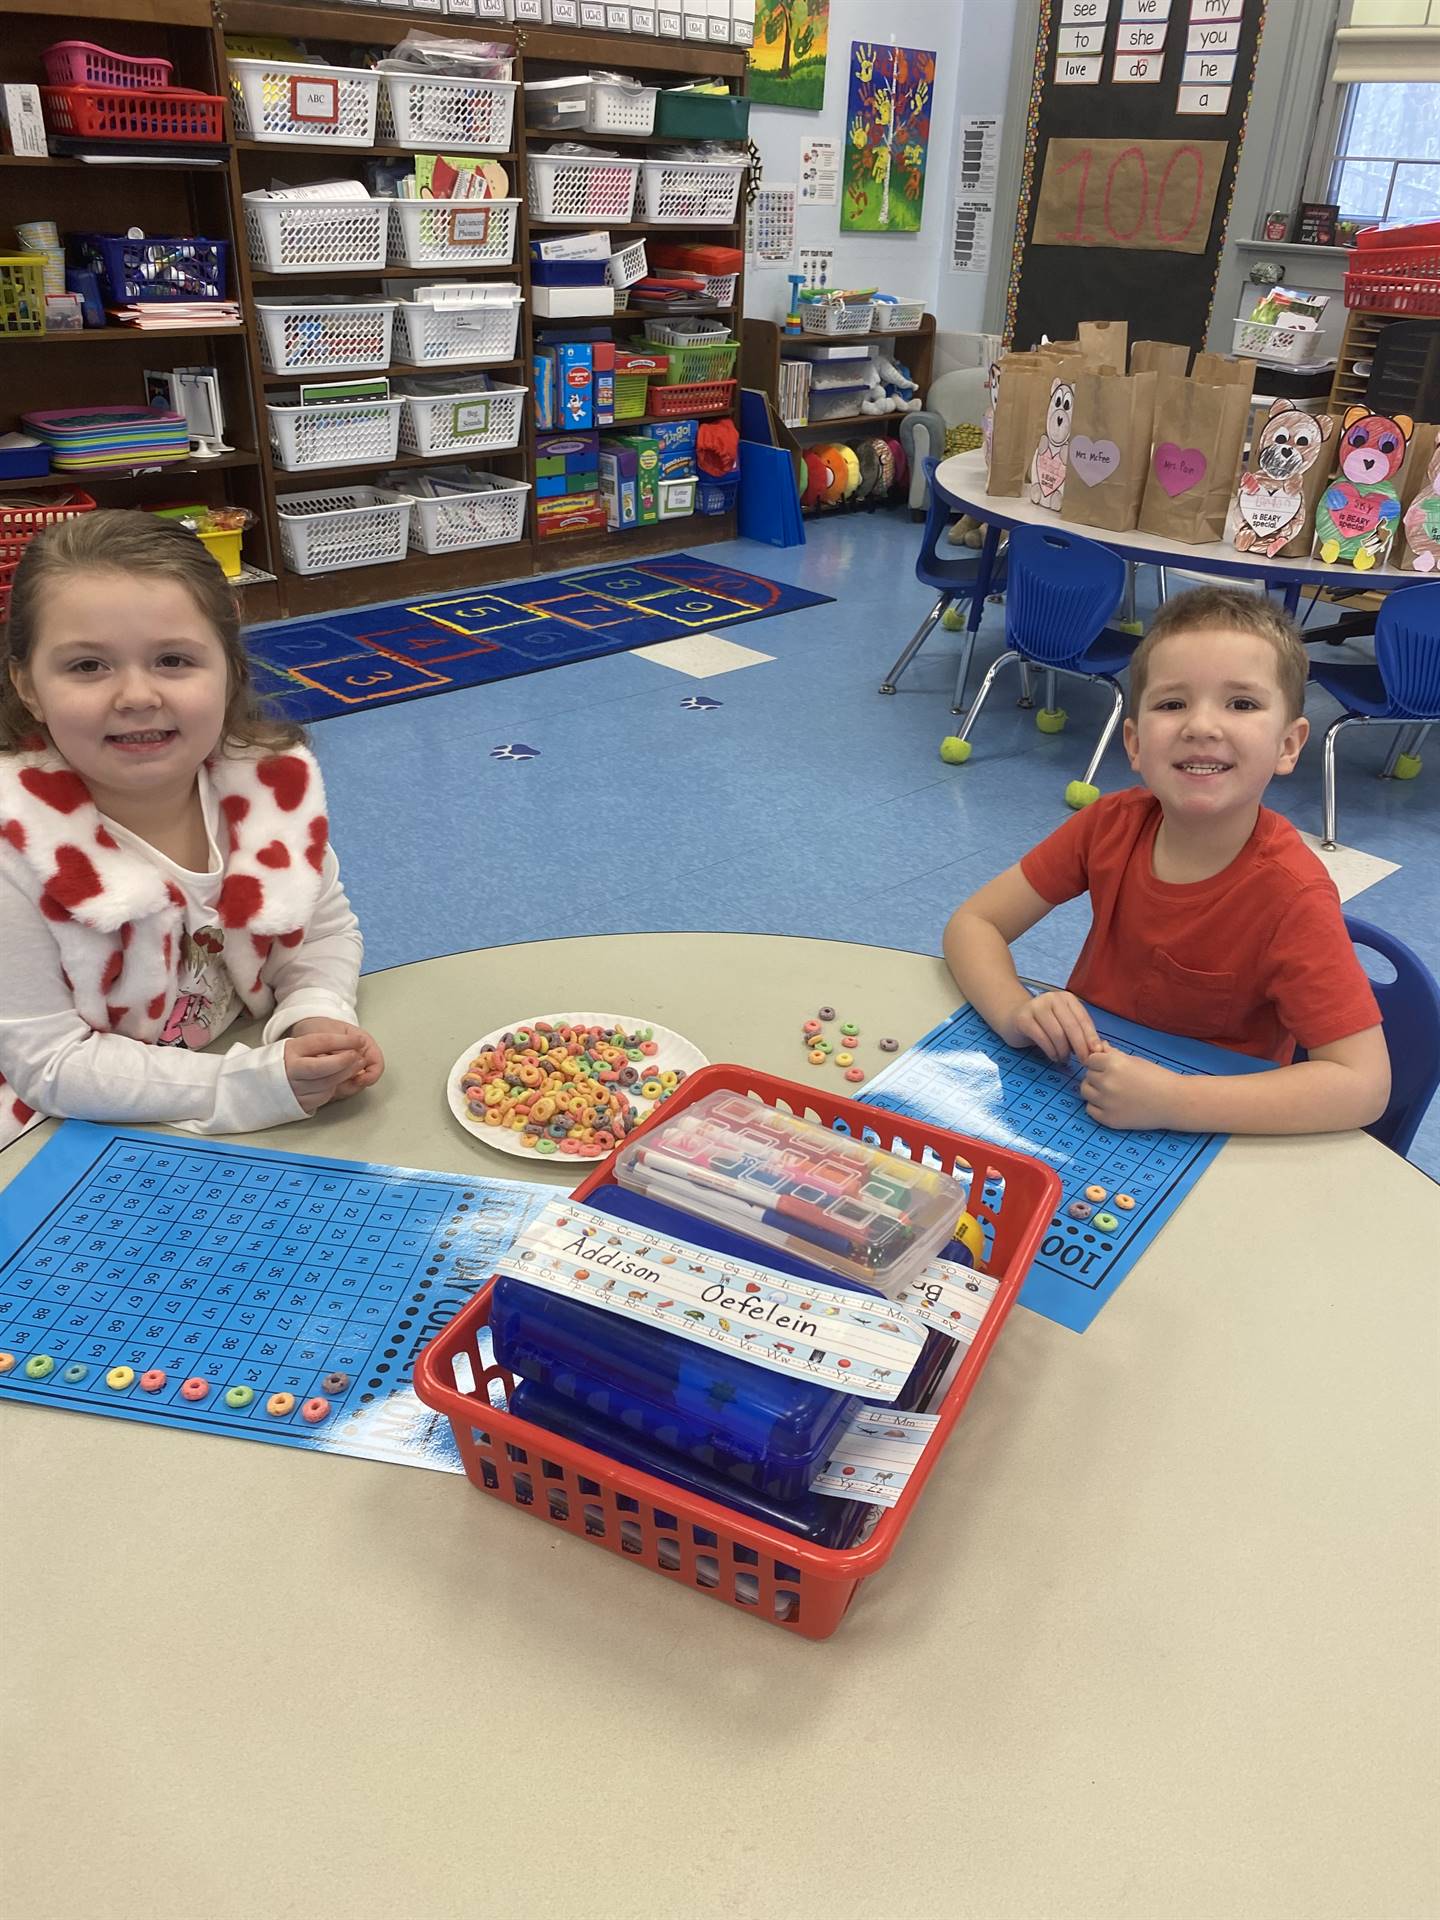 2 students counting fruit loops on a blue counting board